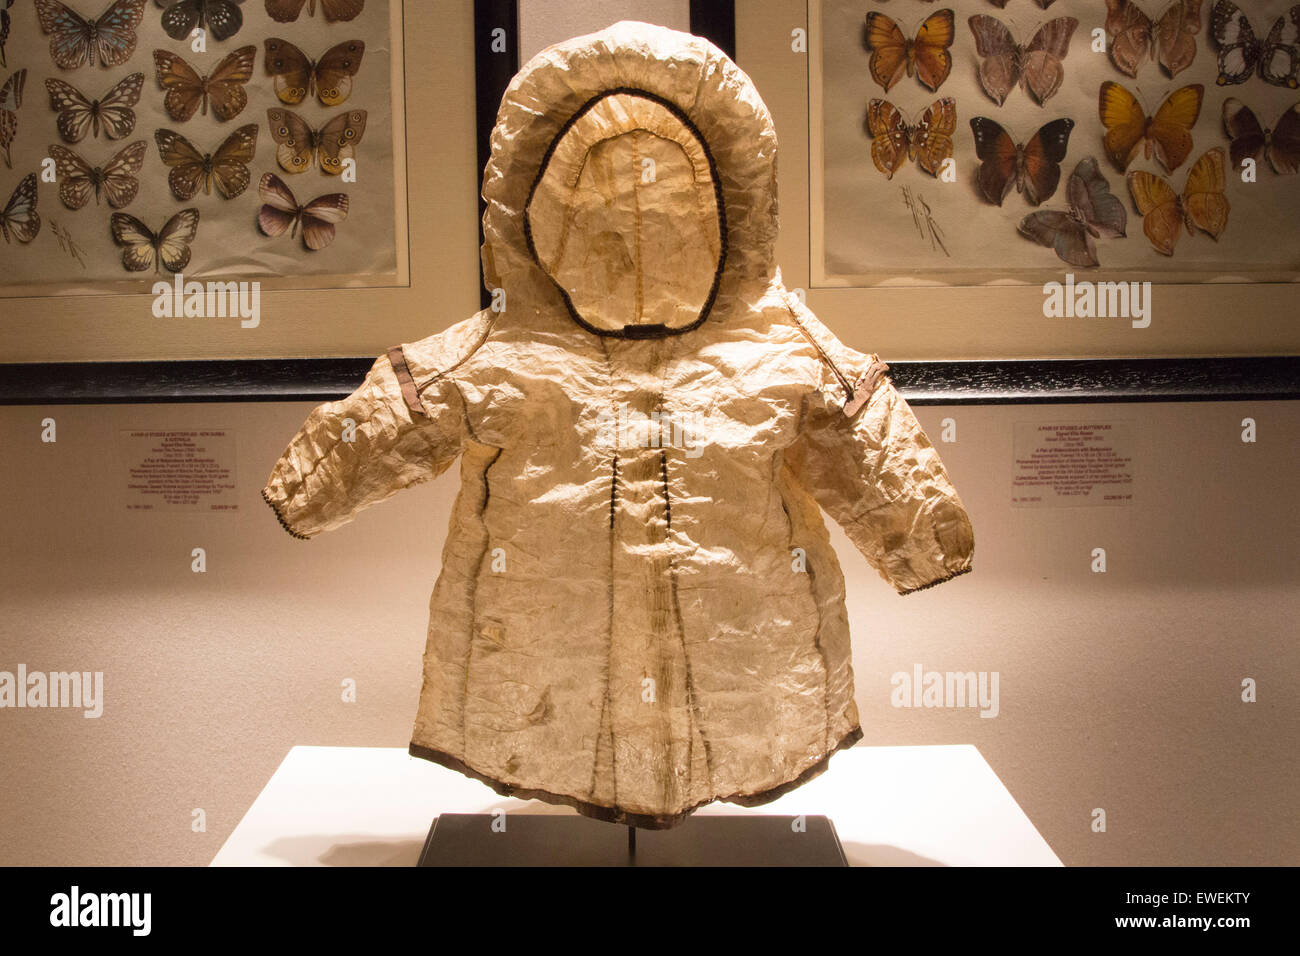 An Eskimo Child's Parka Jacket, East of West Arctic made from Sea Mammal Gut. Stand of Peter Petrou, London. Press preview of the Masterpiece 2015 fine art fair in the grounds of the Royal Hospital Chelsea. The fair is open to the public from 25 June to 1 July 2015. Stock Photo